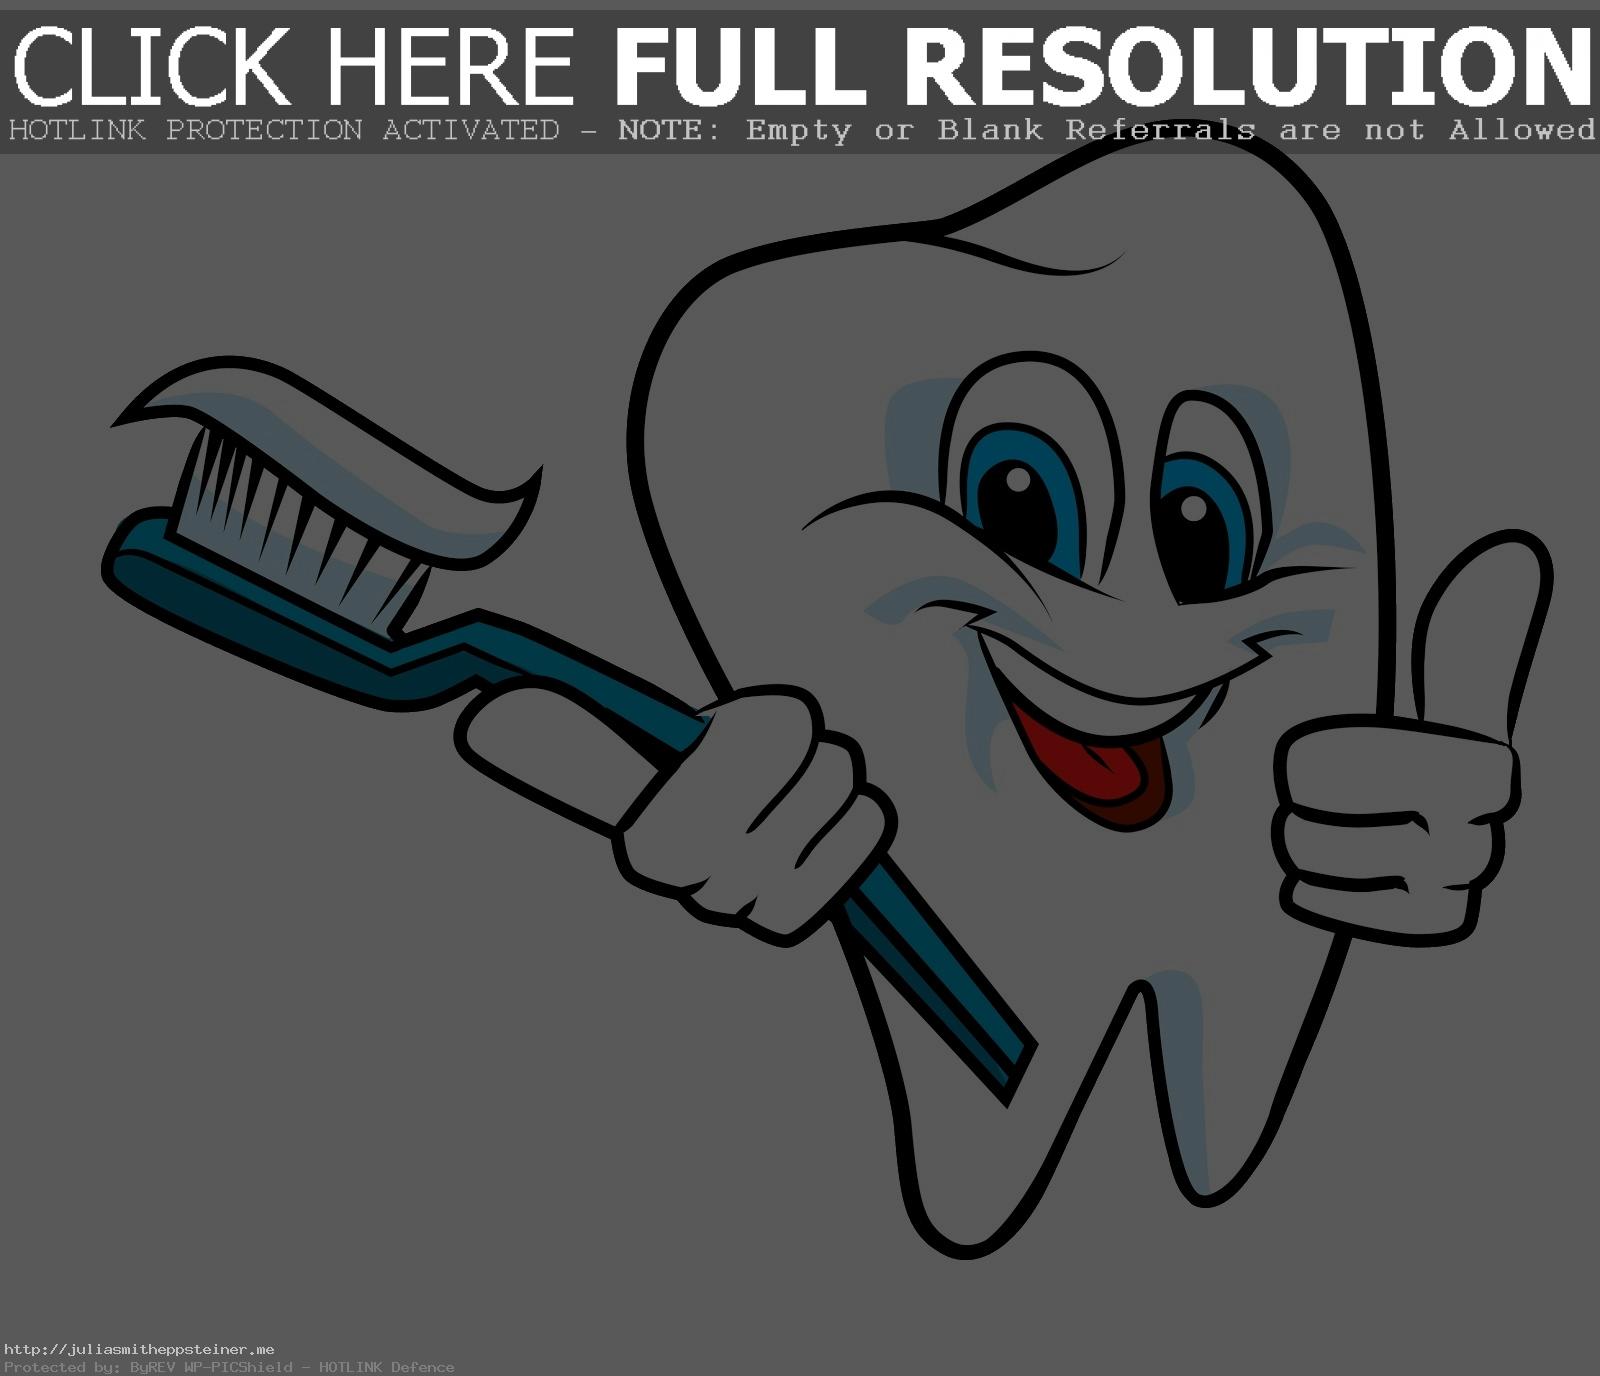 Three Toothbrushes Free Clip 